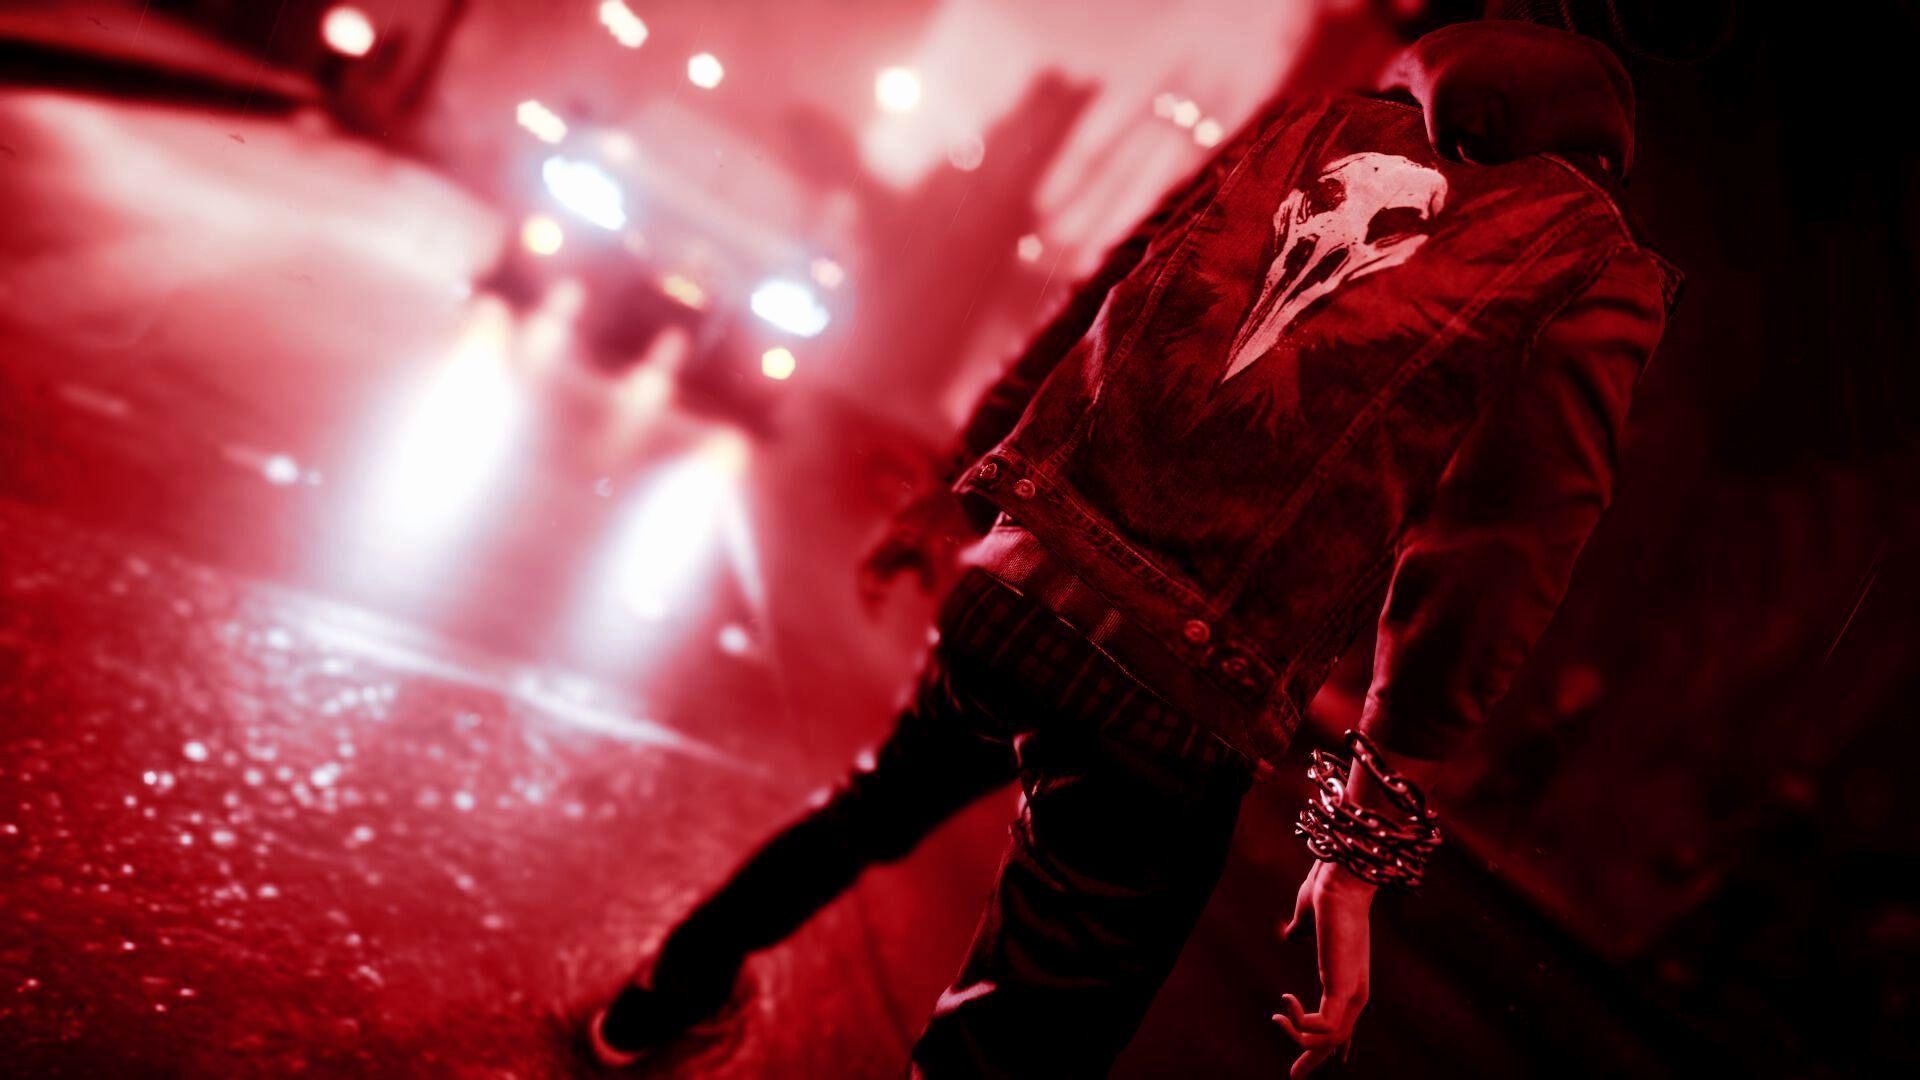 Infamous Second son Wallpaper Unique Infamous Second son Delsin Rowe Playstation Playstation 4 HD Wallpaper Desktop and Mobile This Week of The Hudson